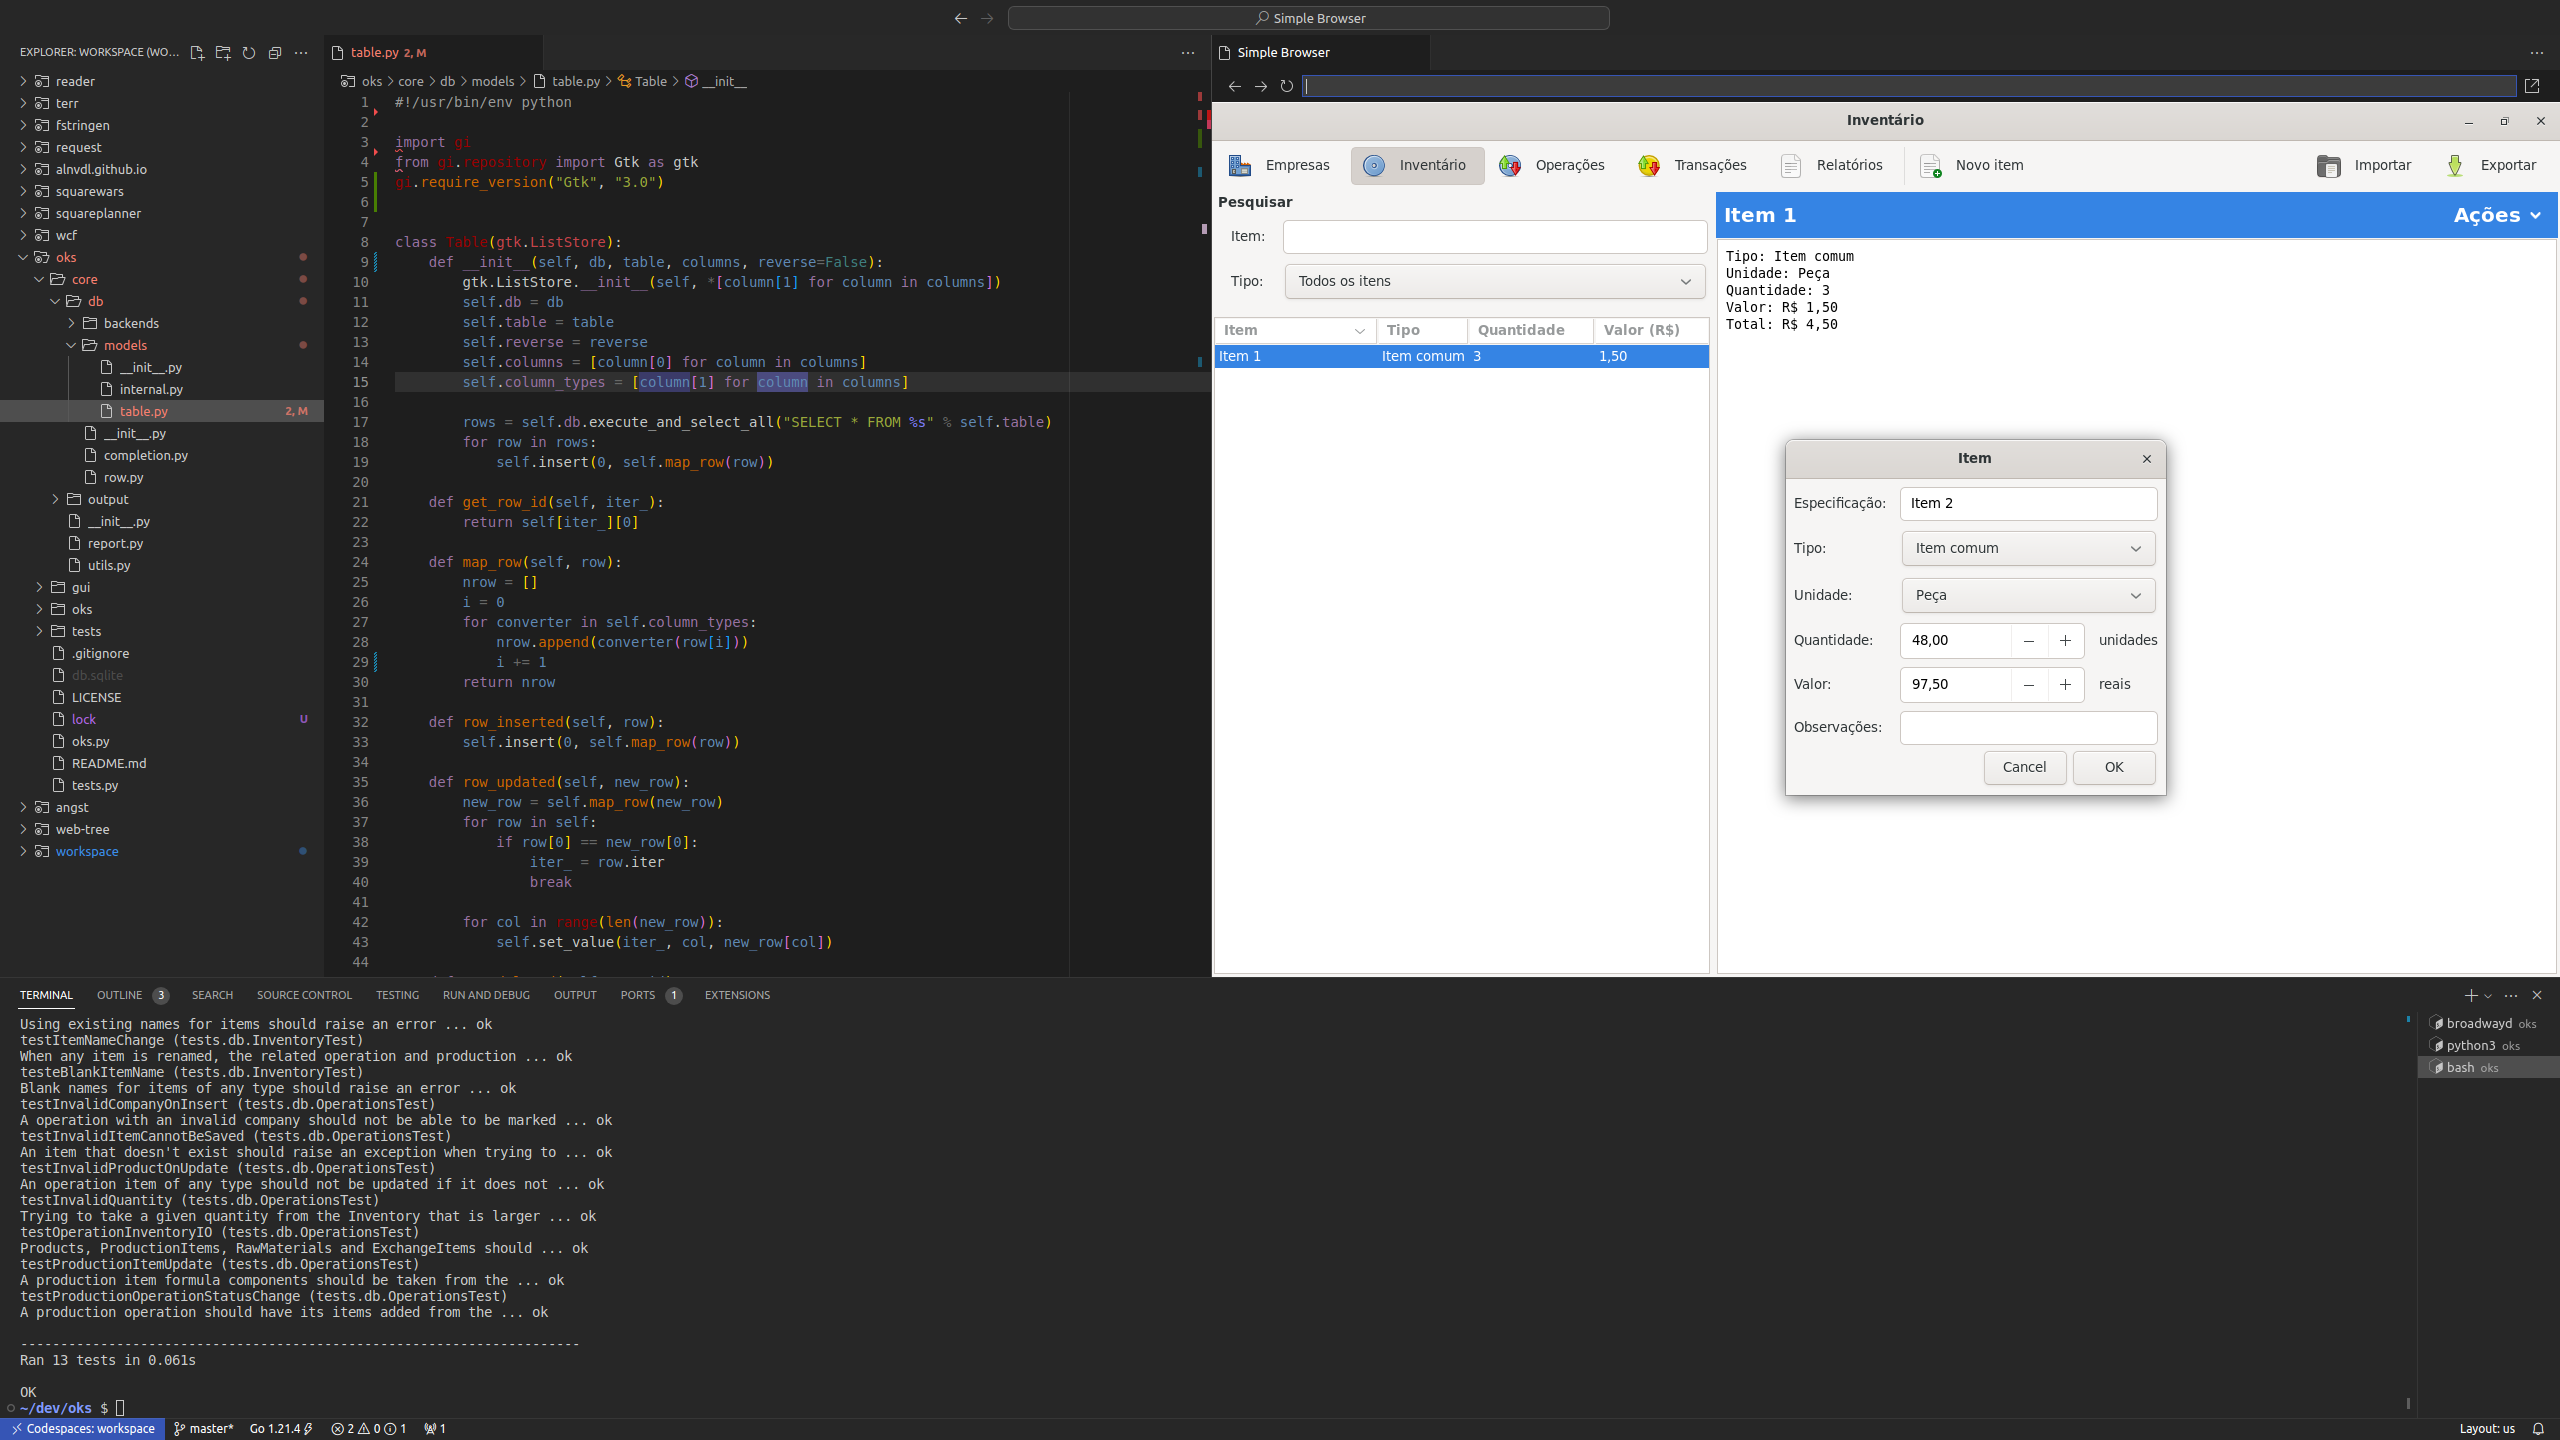 VS Code running in a full-screen browser window, connected to a GitHub codespace, editing Python code for a graphical ERP application called [Oks](https://github.com/alnvdl/oks), with a terminal open and an embedded browser displaying the GTK interface of the application.